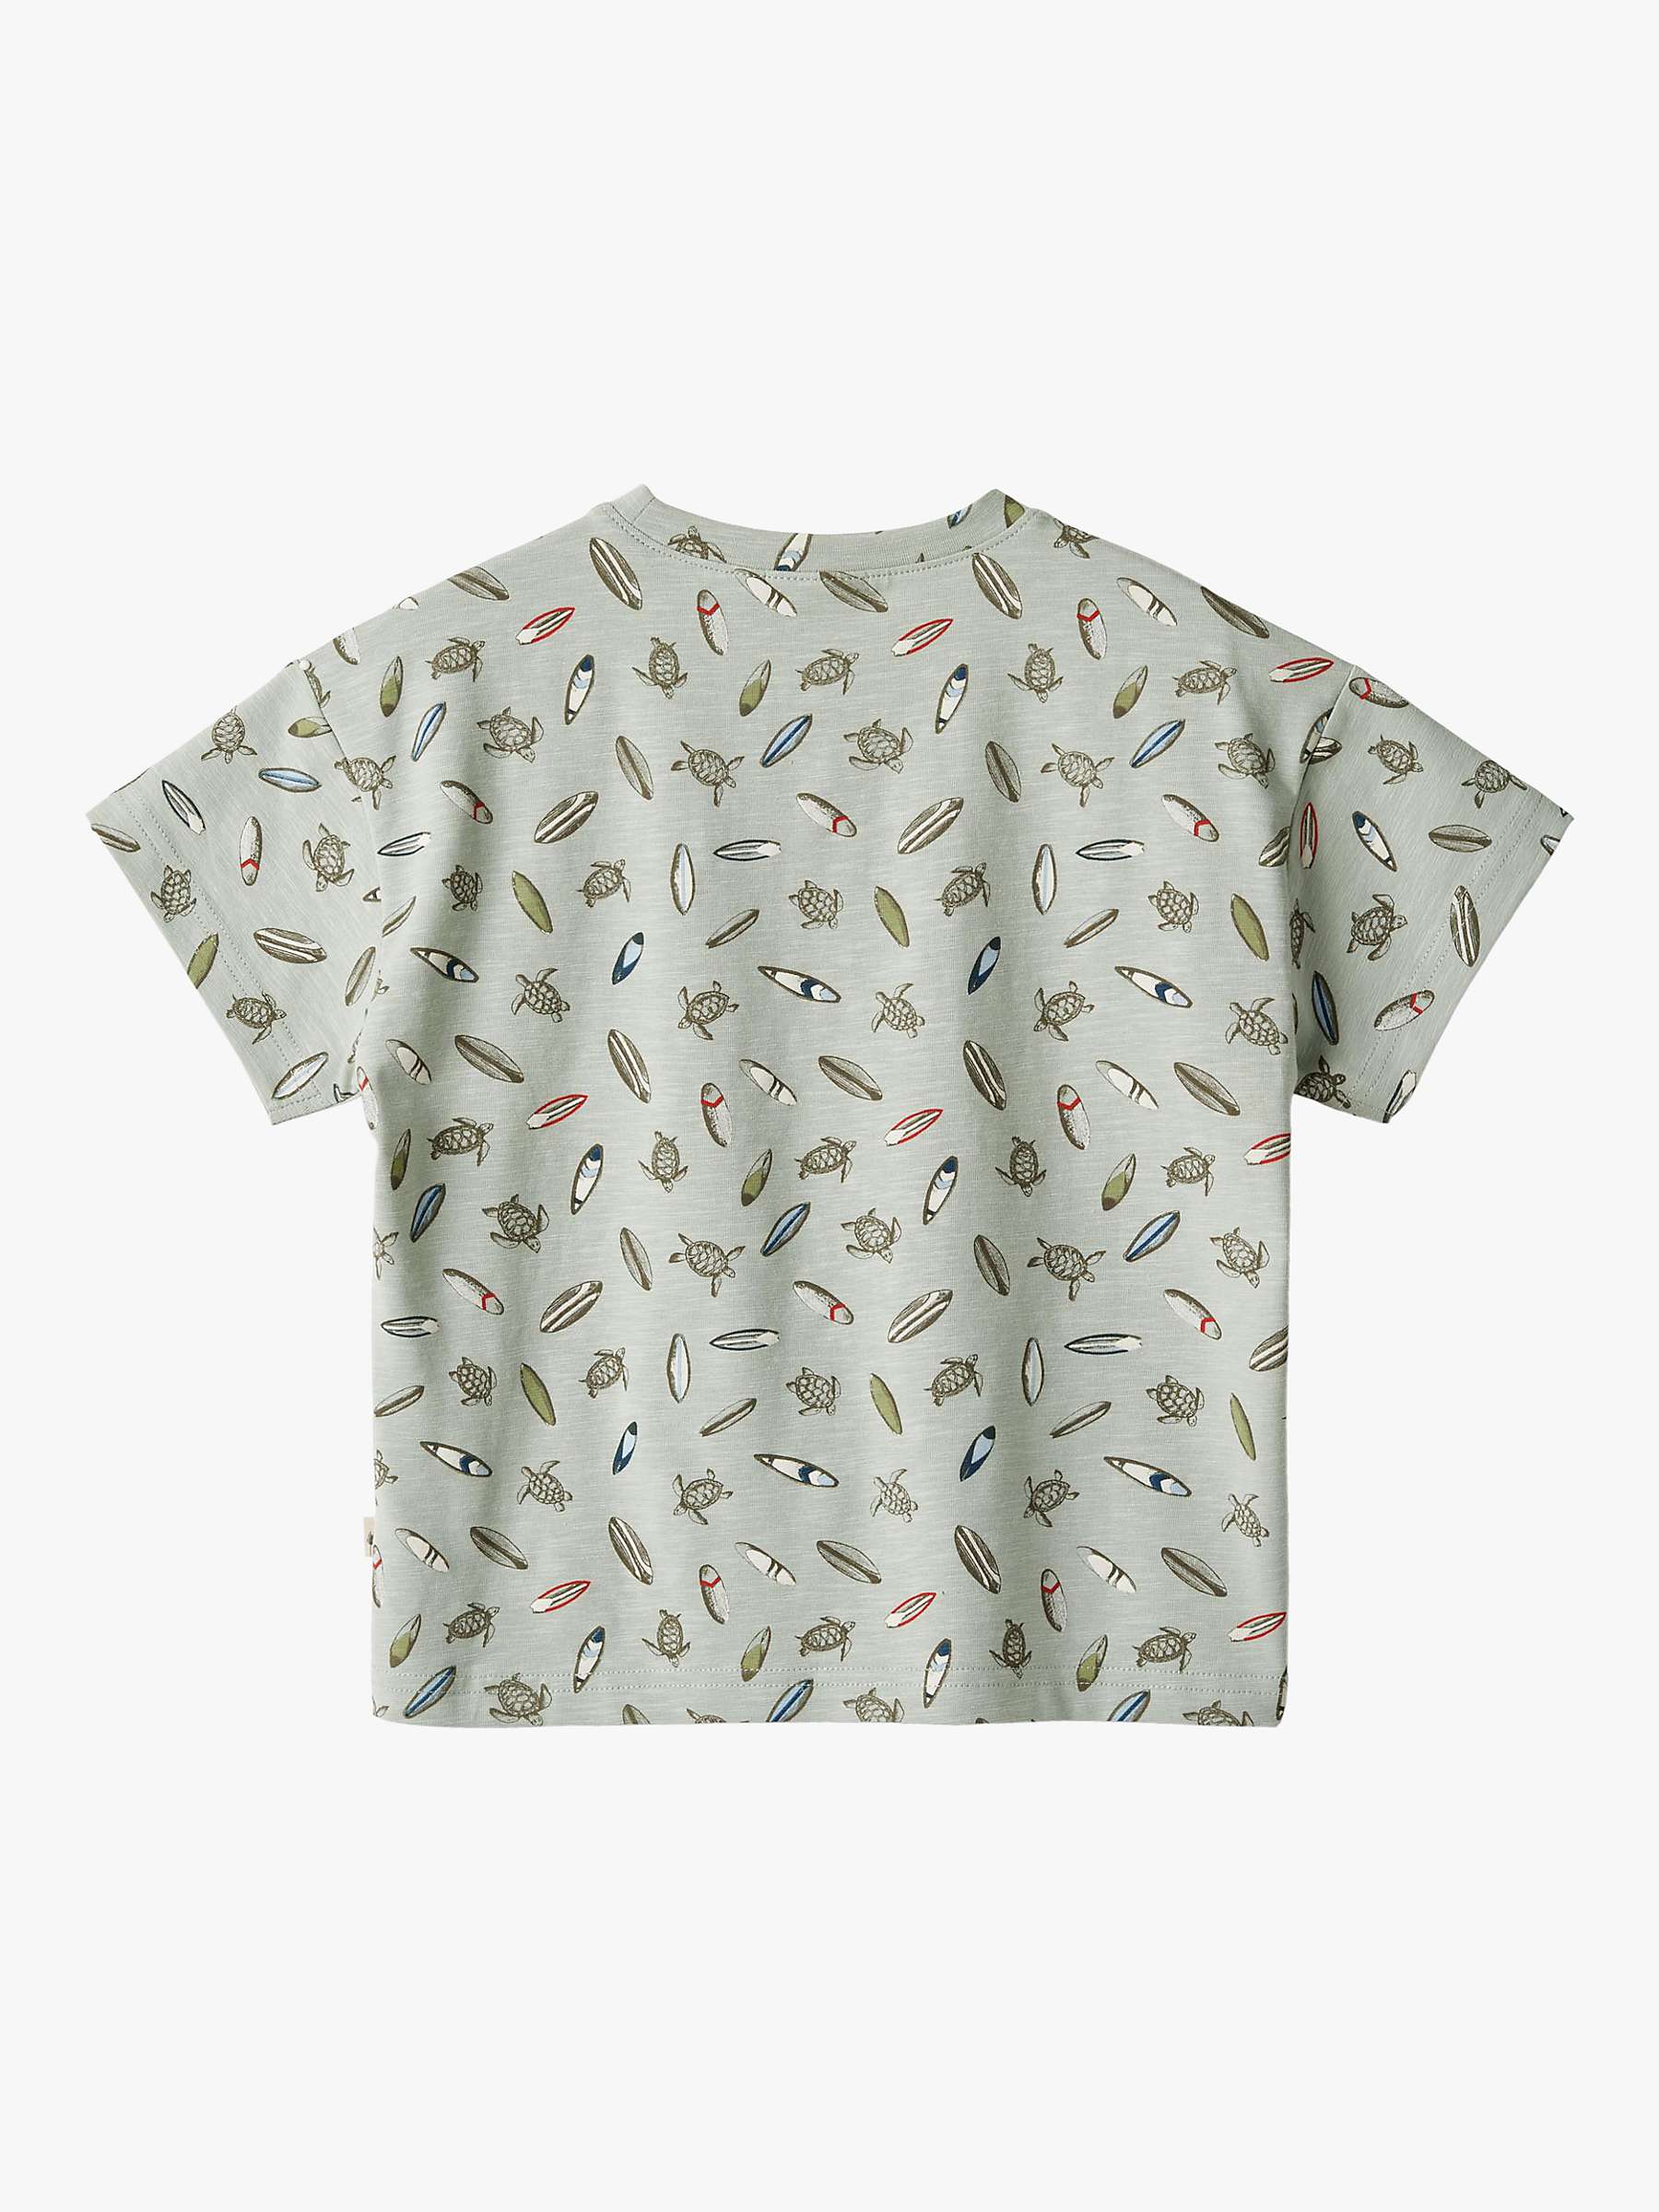 Buy WHEAT Kids' Tommy Print T-Shirt, Multi Online at johnlewis.com